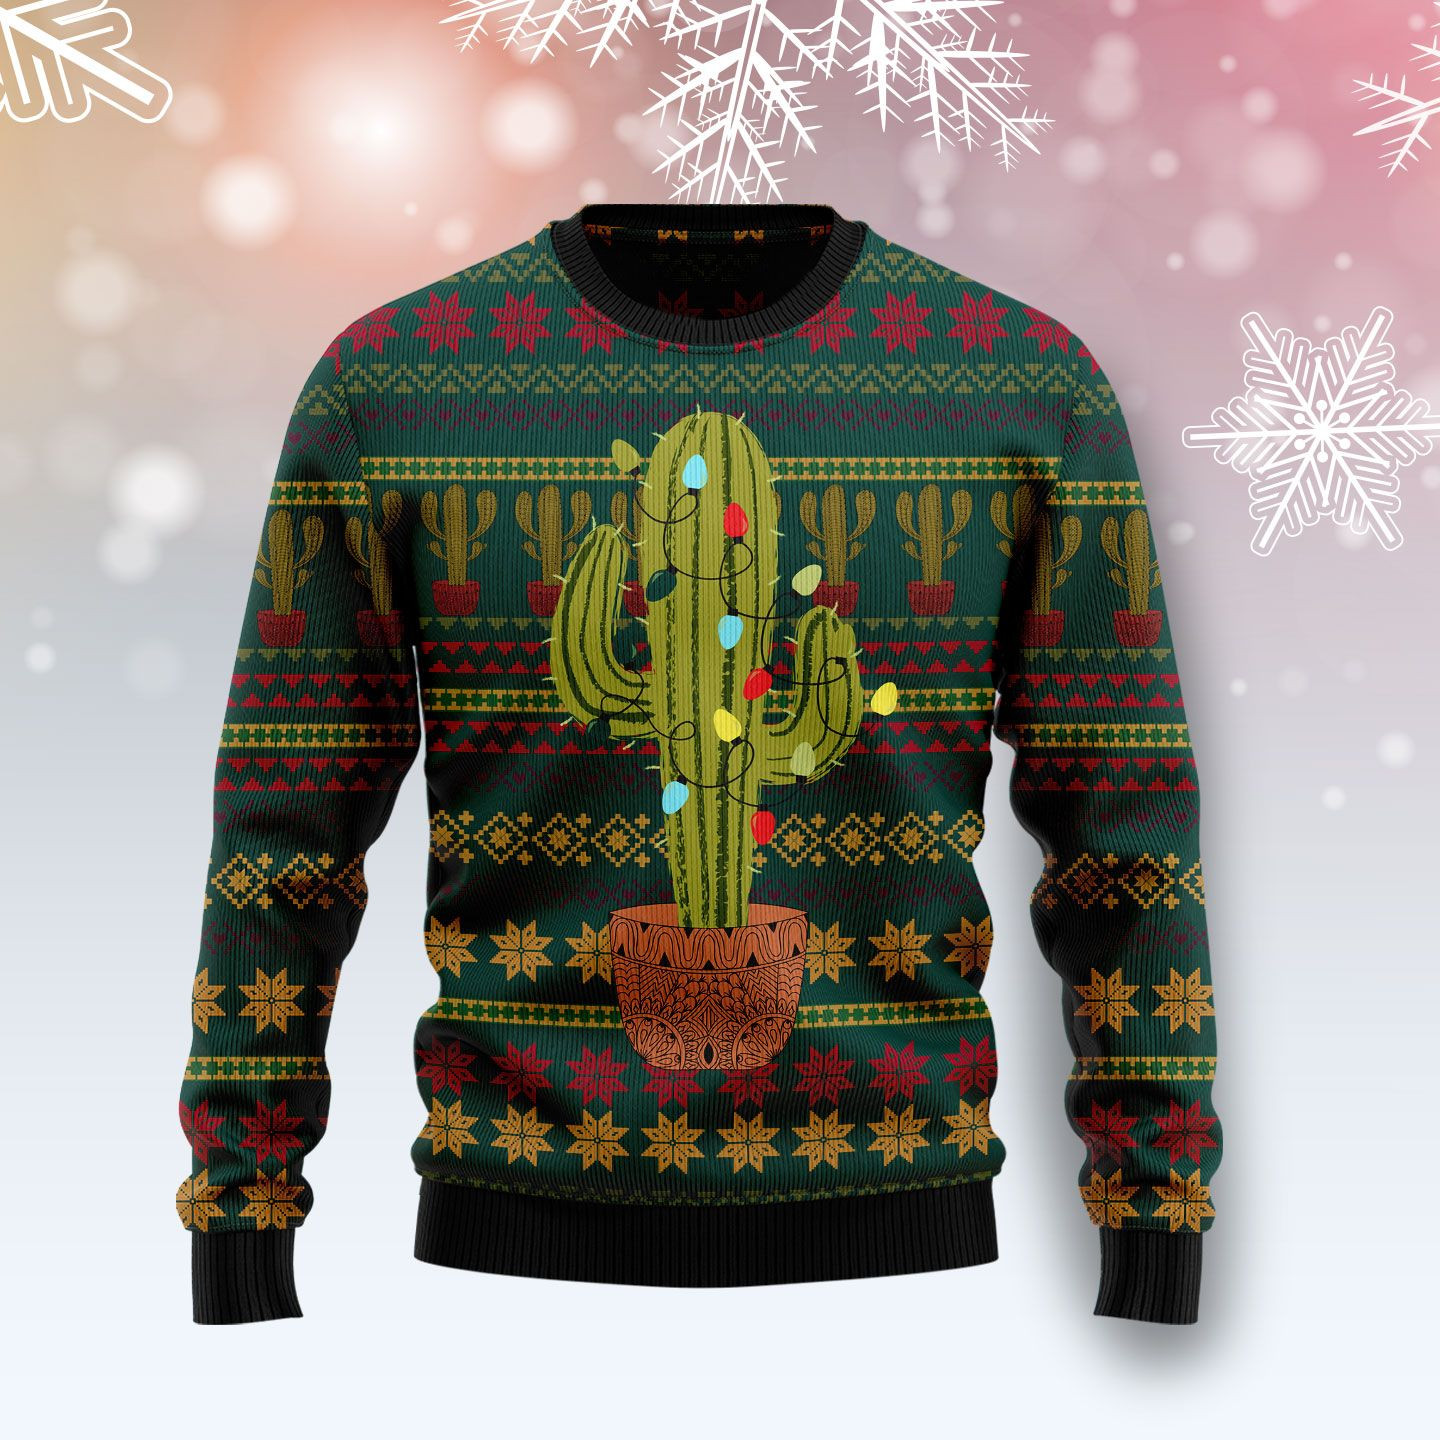 Cactus Christmas T309 Ugly Christmas Sweater, Ugly Sweater For Men Women, Holiday Sweater